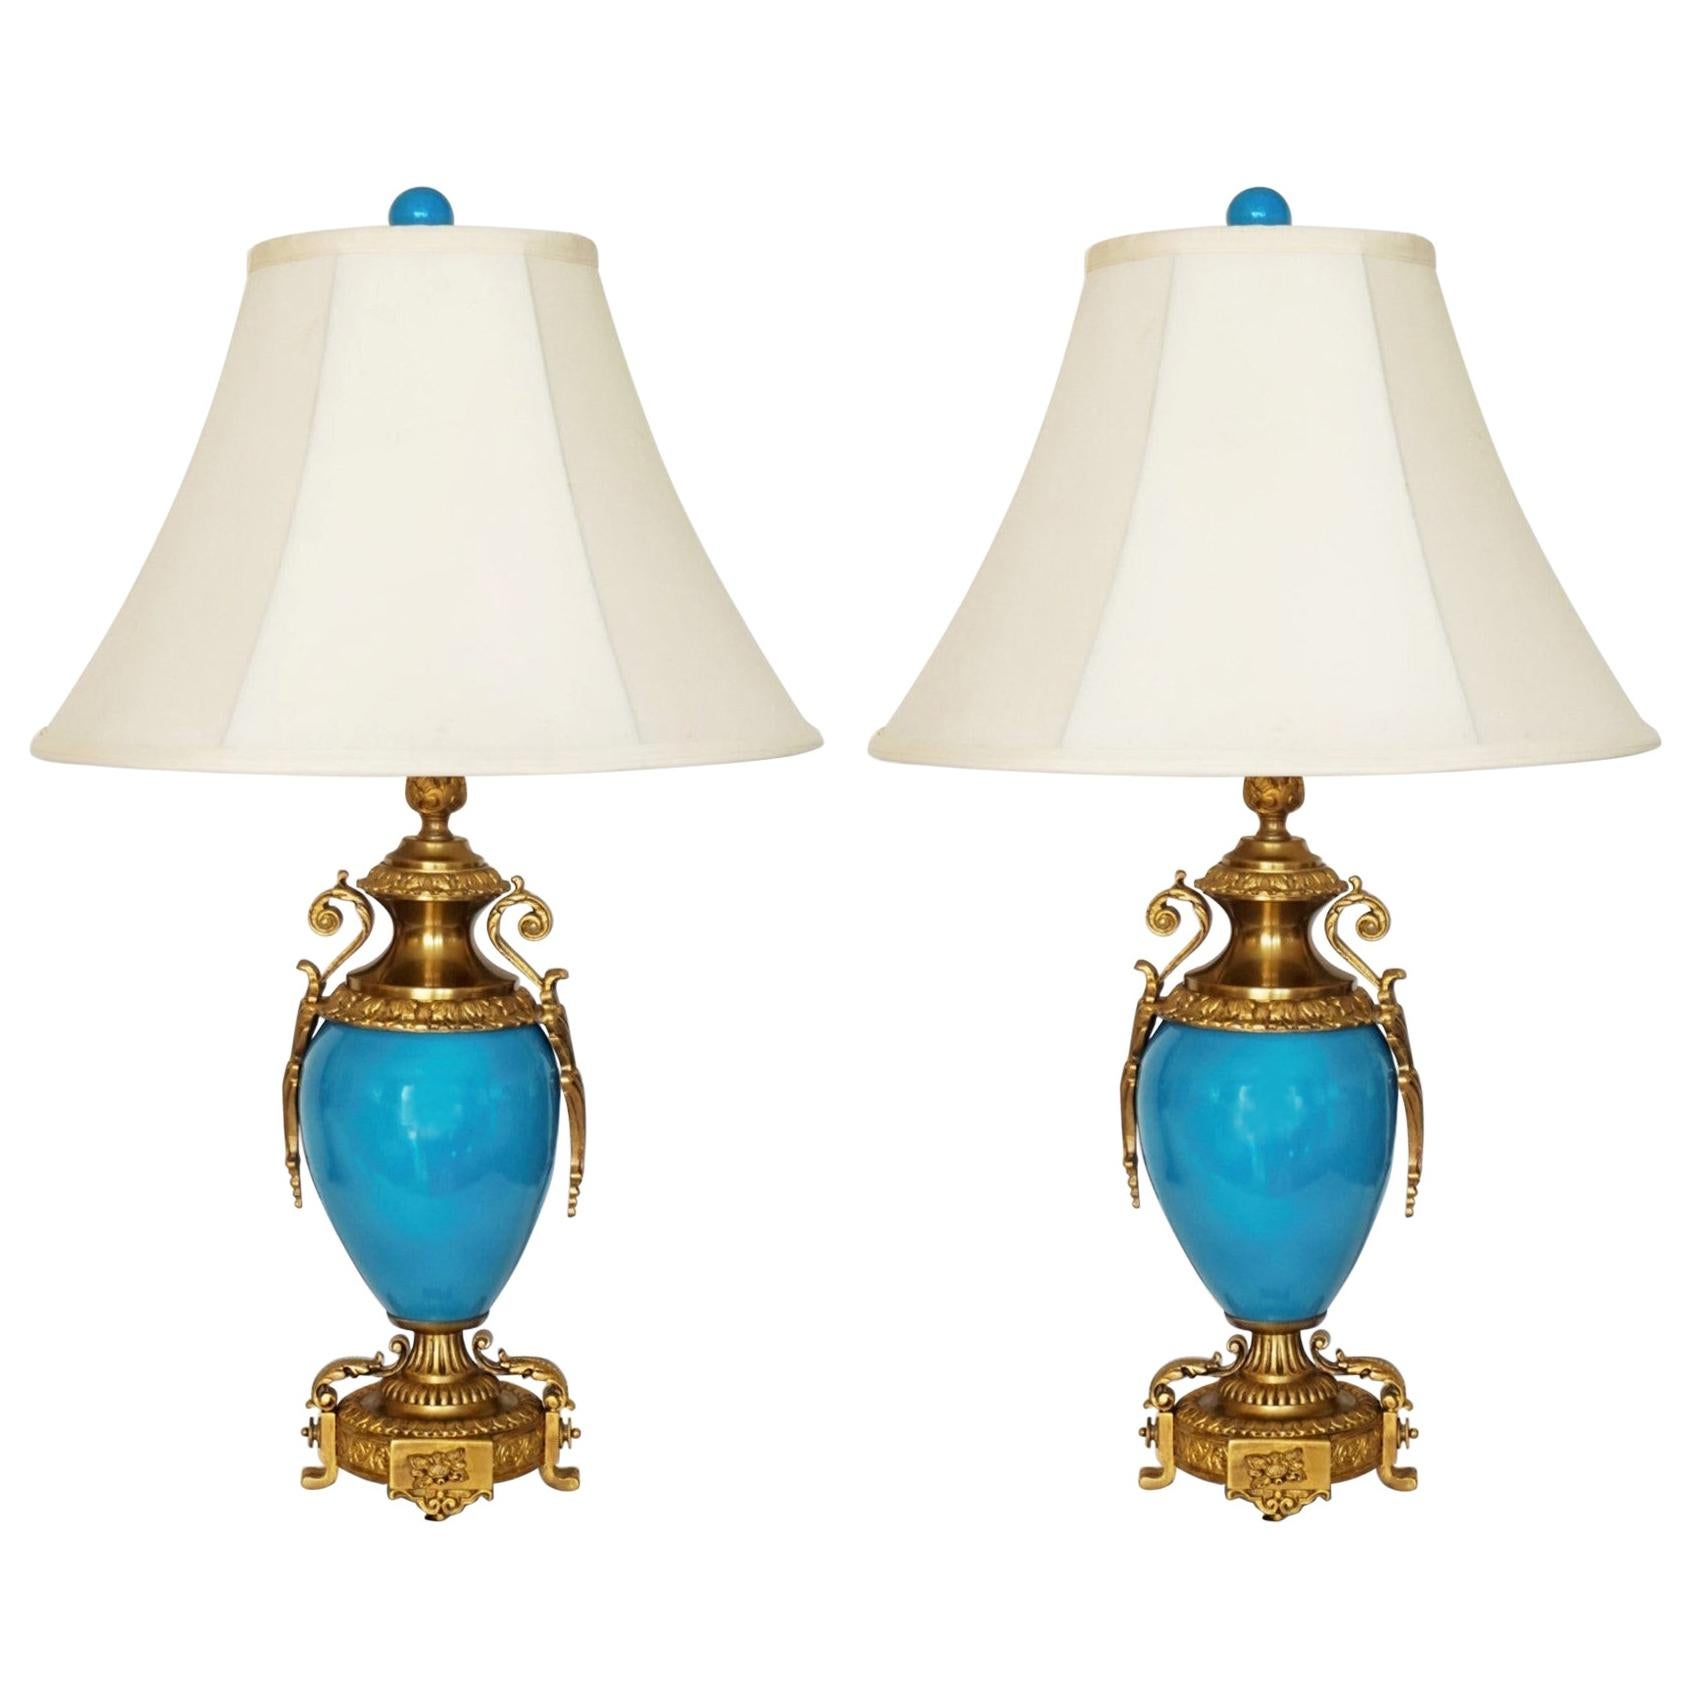 Pair of French Gilt Bronze-Mounted Turquoise Blue Porcelain Table Lamps